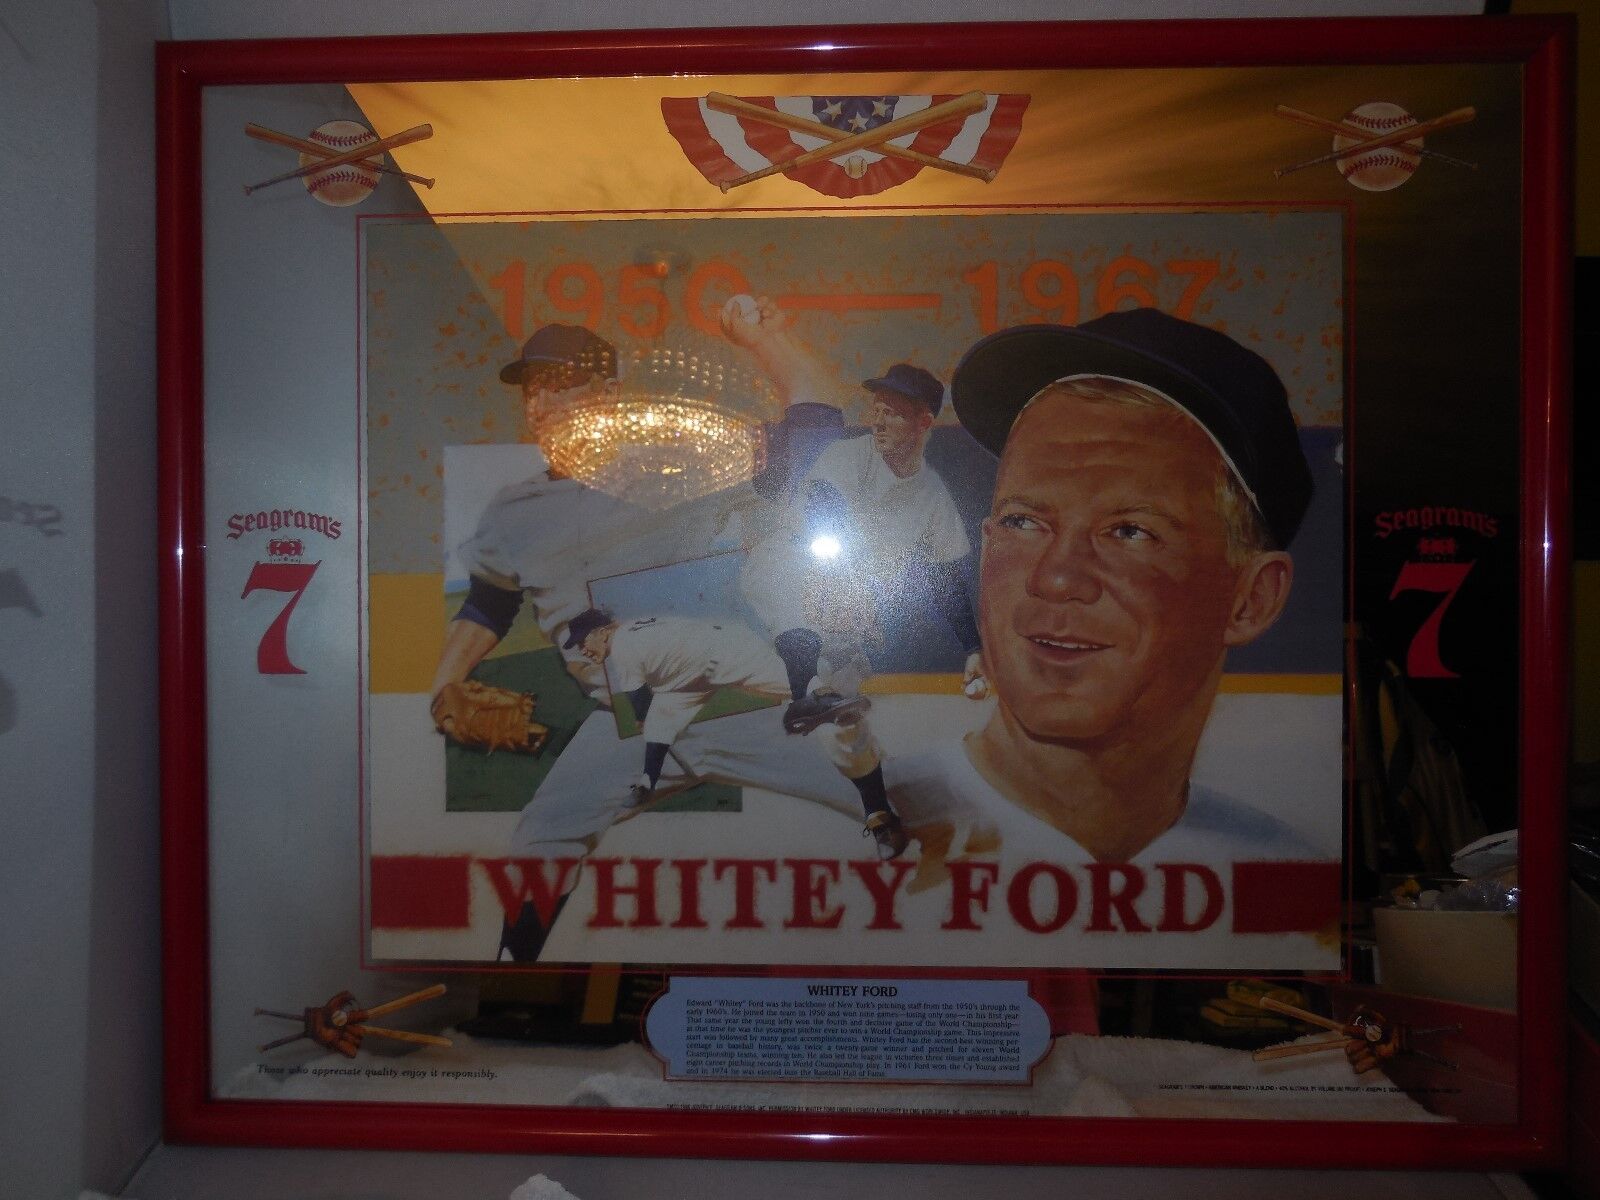 1996 whitey ford seagrams 7 glass sign